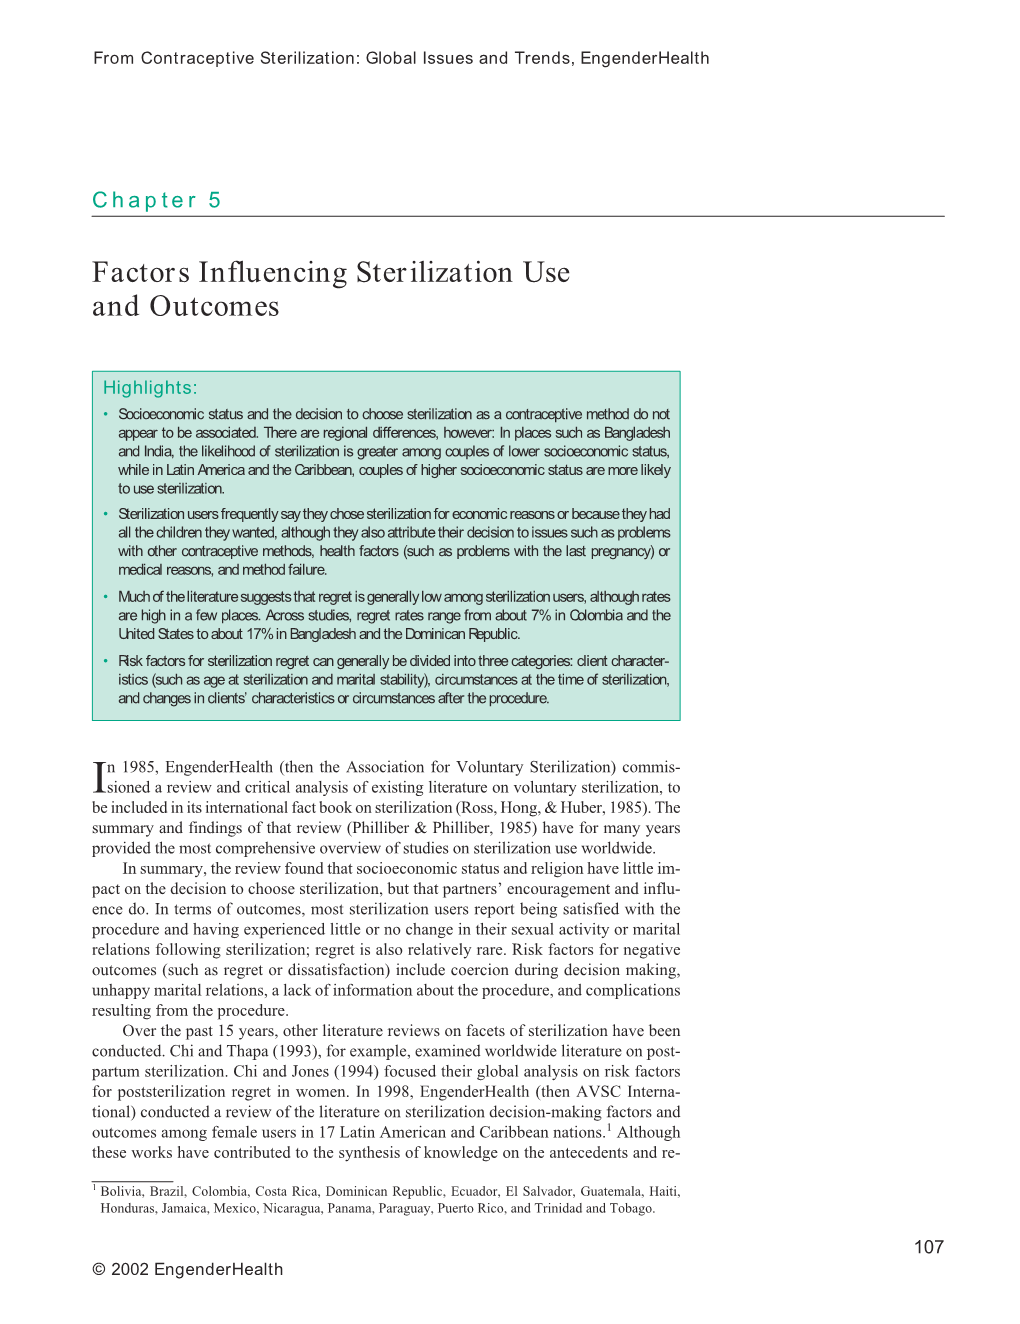 Chapter 5: Factors Influencing Sterilization Use and Outcomes